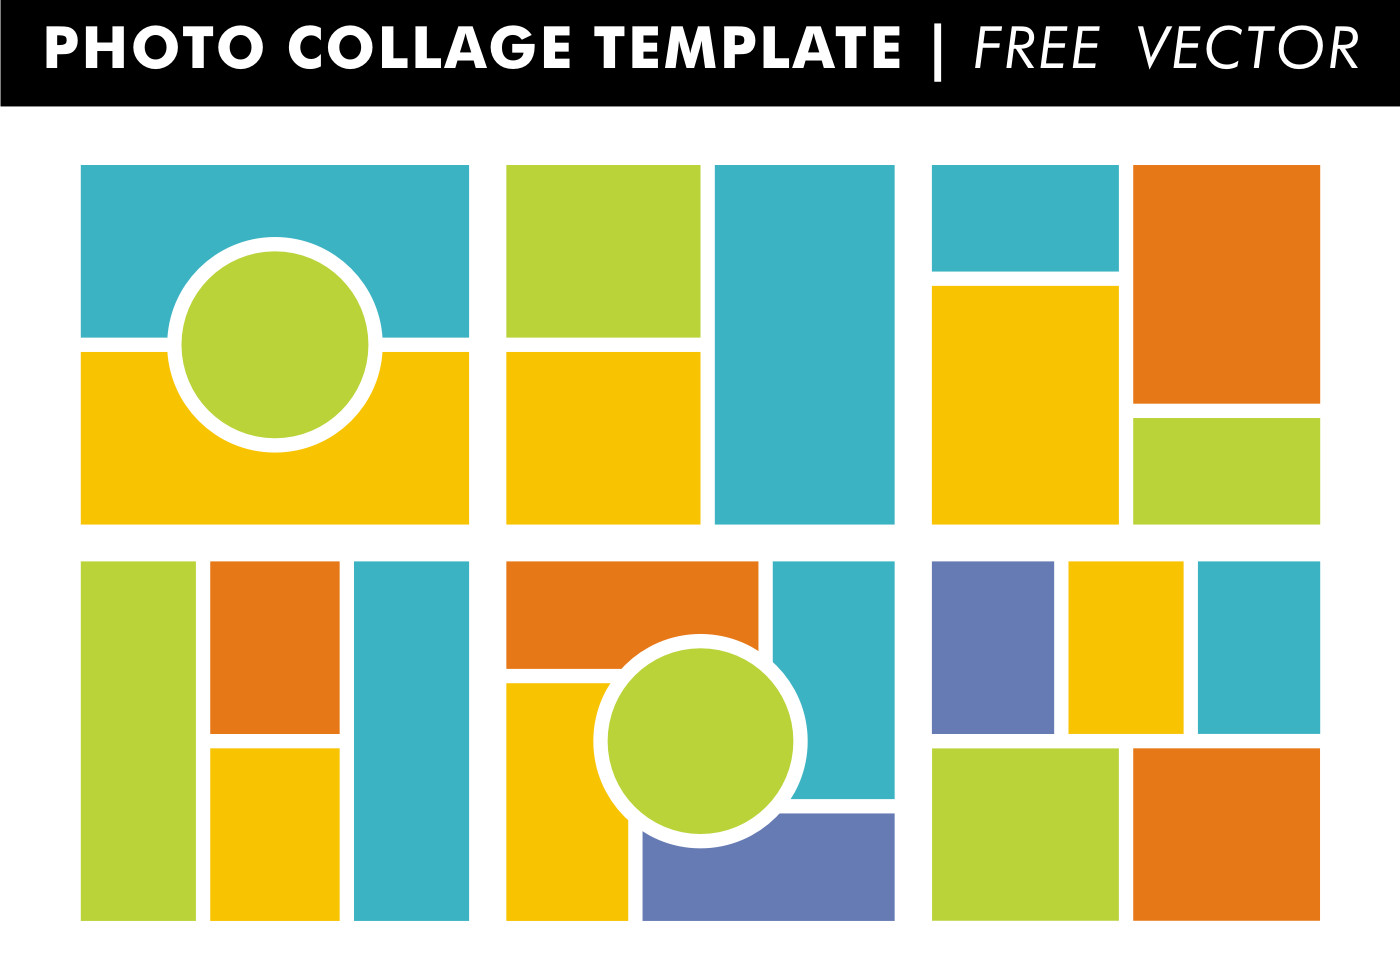 Photo Collage Template Free Collage Templates Vector Download Free Vector Art